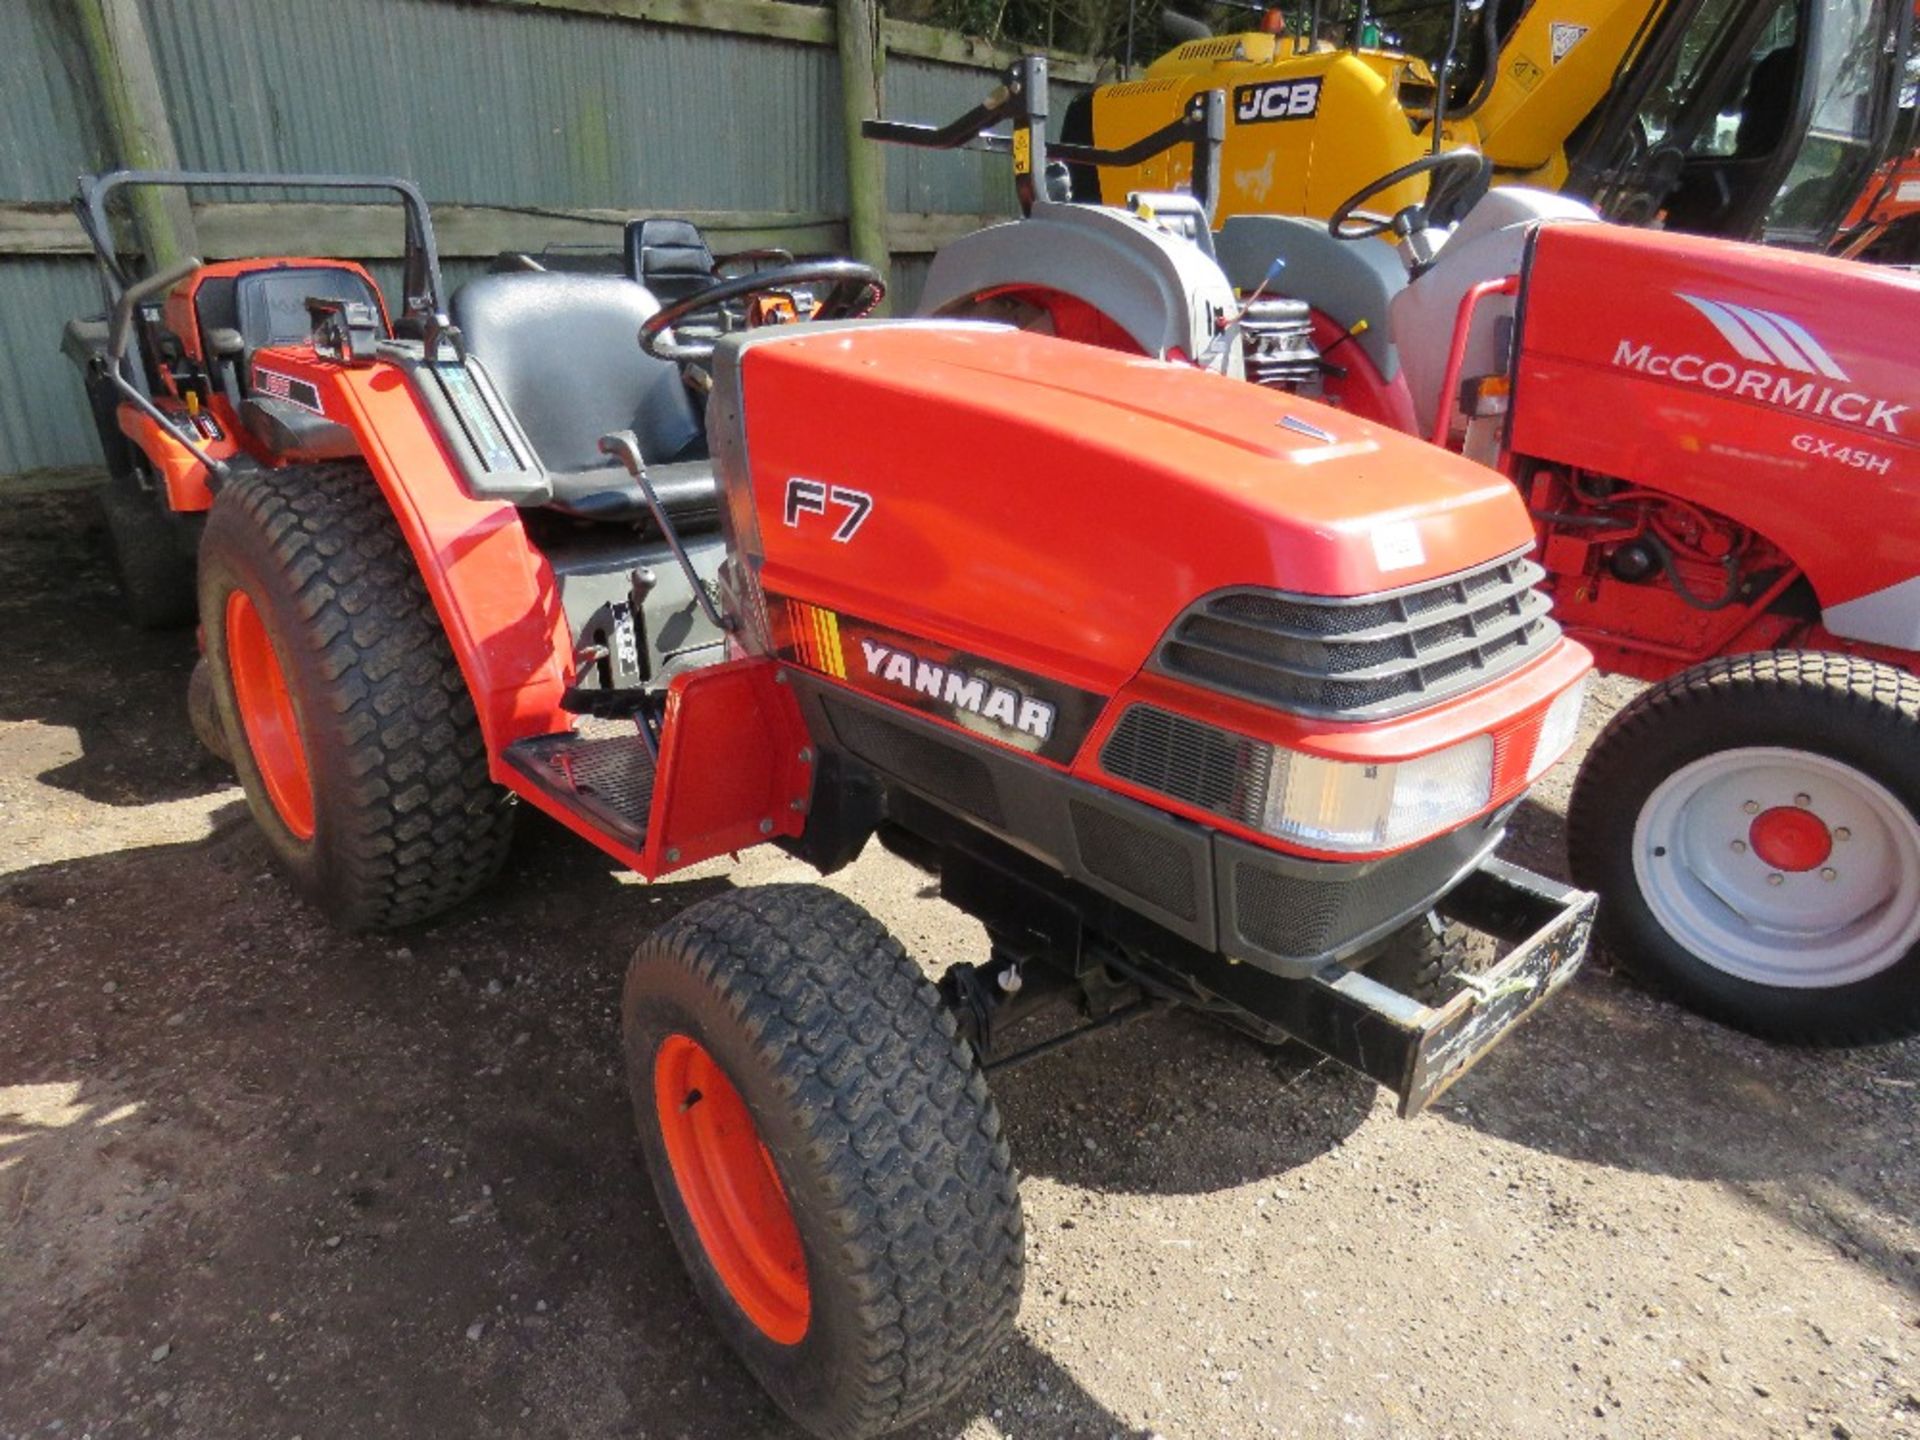 YANMAR F7 COMPACT TRACTOR ON GRASS TYRES. 125 REC HRS. WHEN TESTED WAS SEEN TO RUN, DRIVE, STEER AND